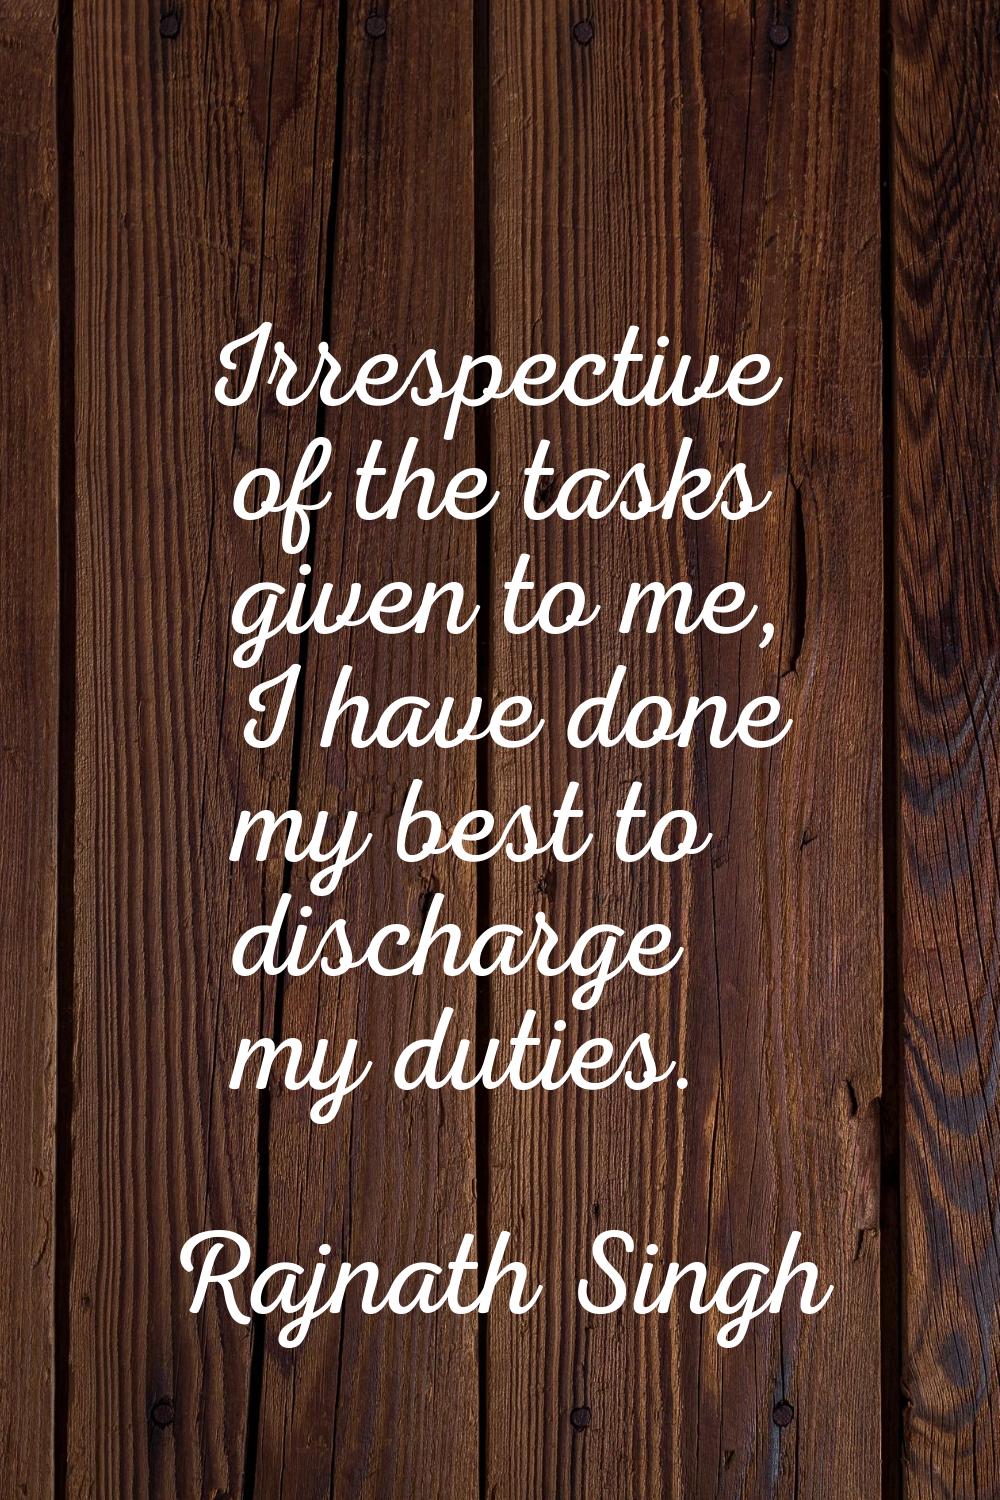 Irrespective of the tasks given to me, I have done my best to discharge my duties.